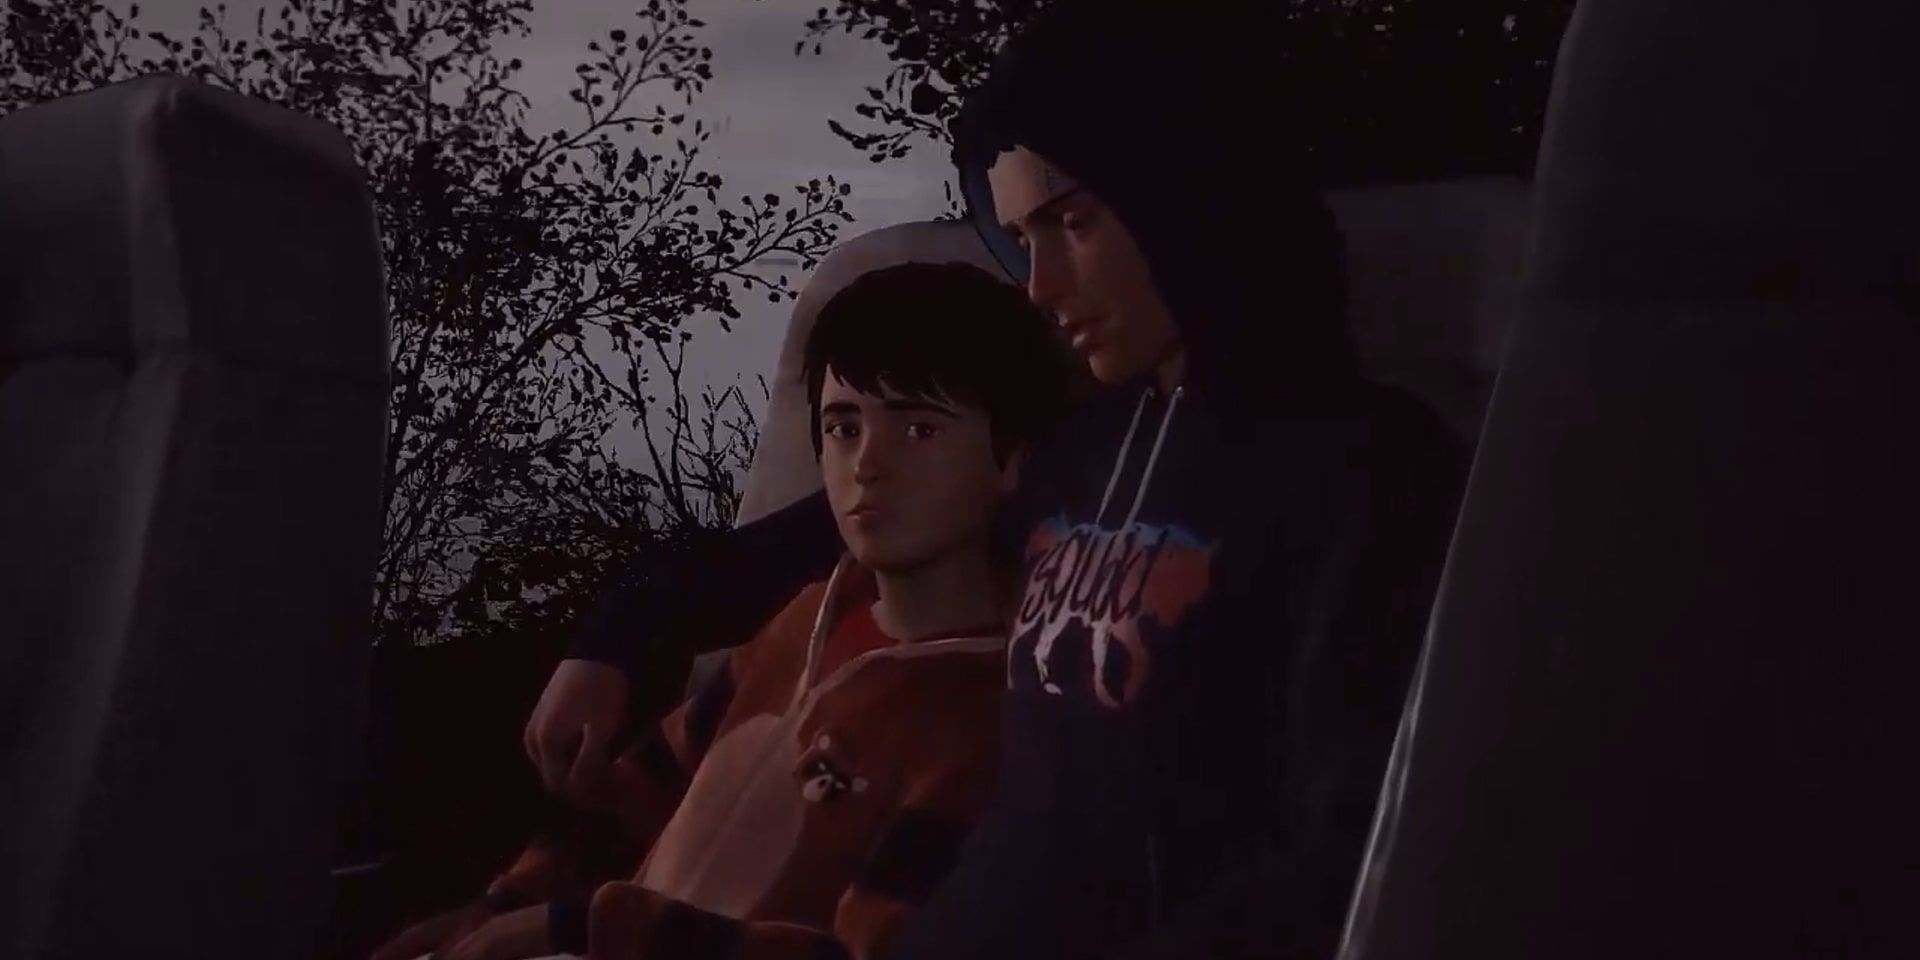 A touching moment where Sean puts his arm around Daniel and tells him a fantasy story just like their dad would aboard a bus in Life is Strange 2